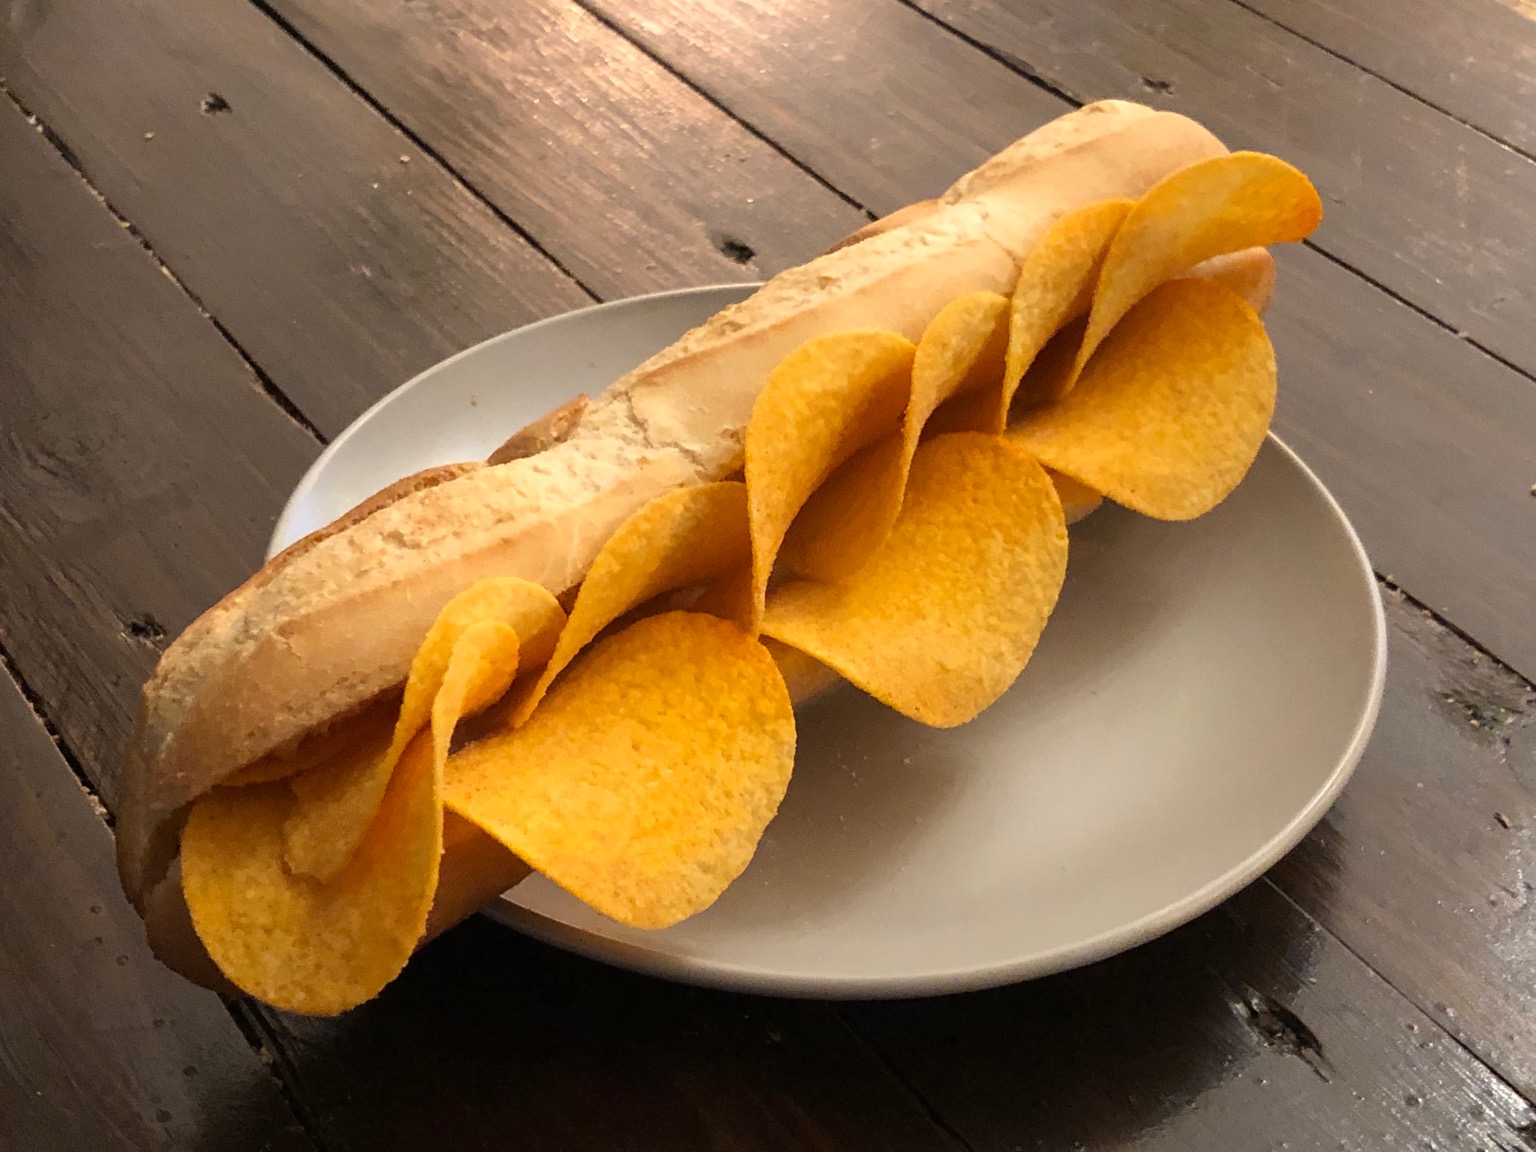 Entire baguette filled with Pringles